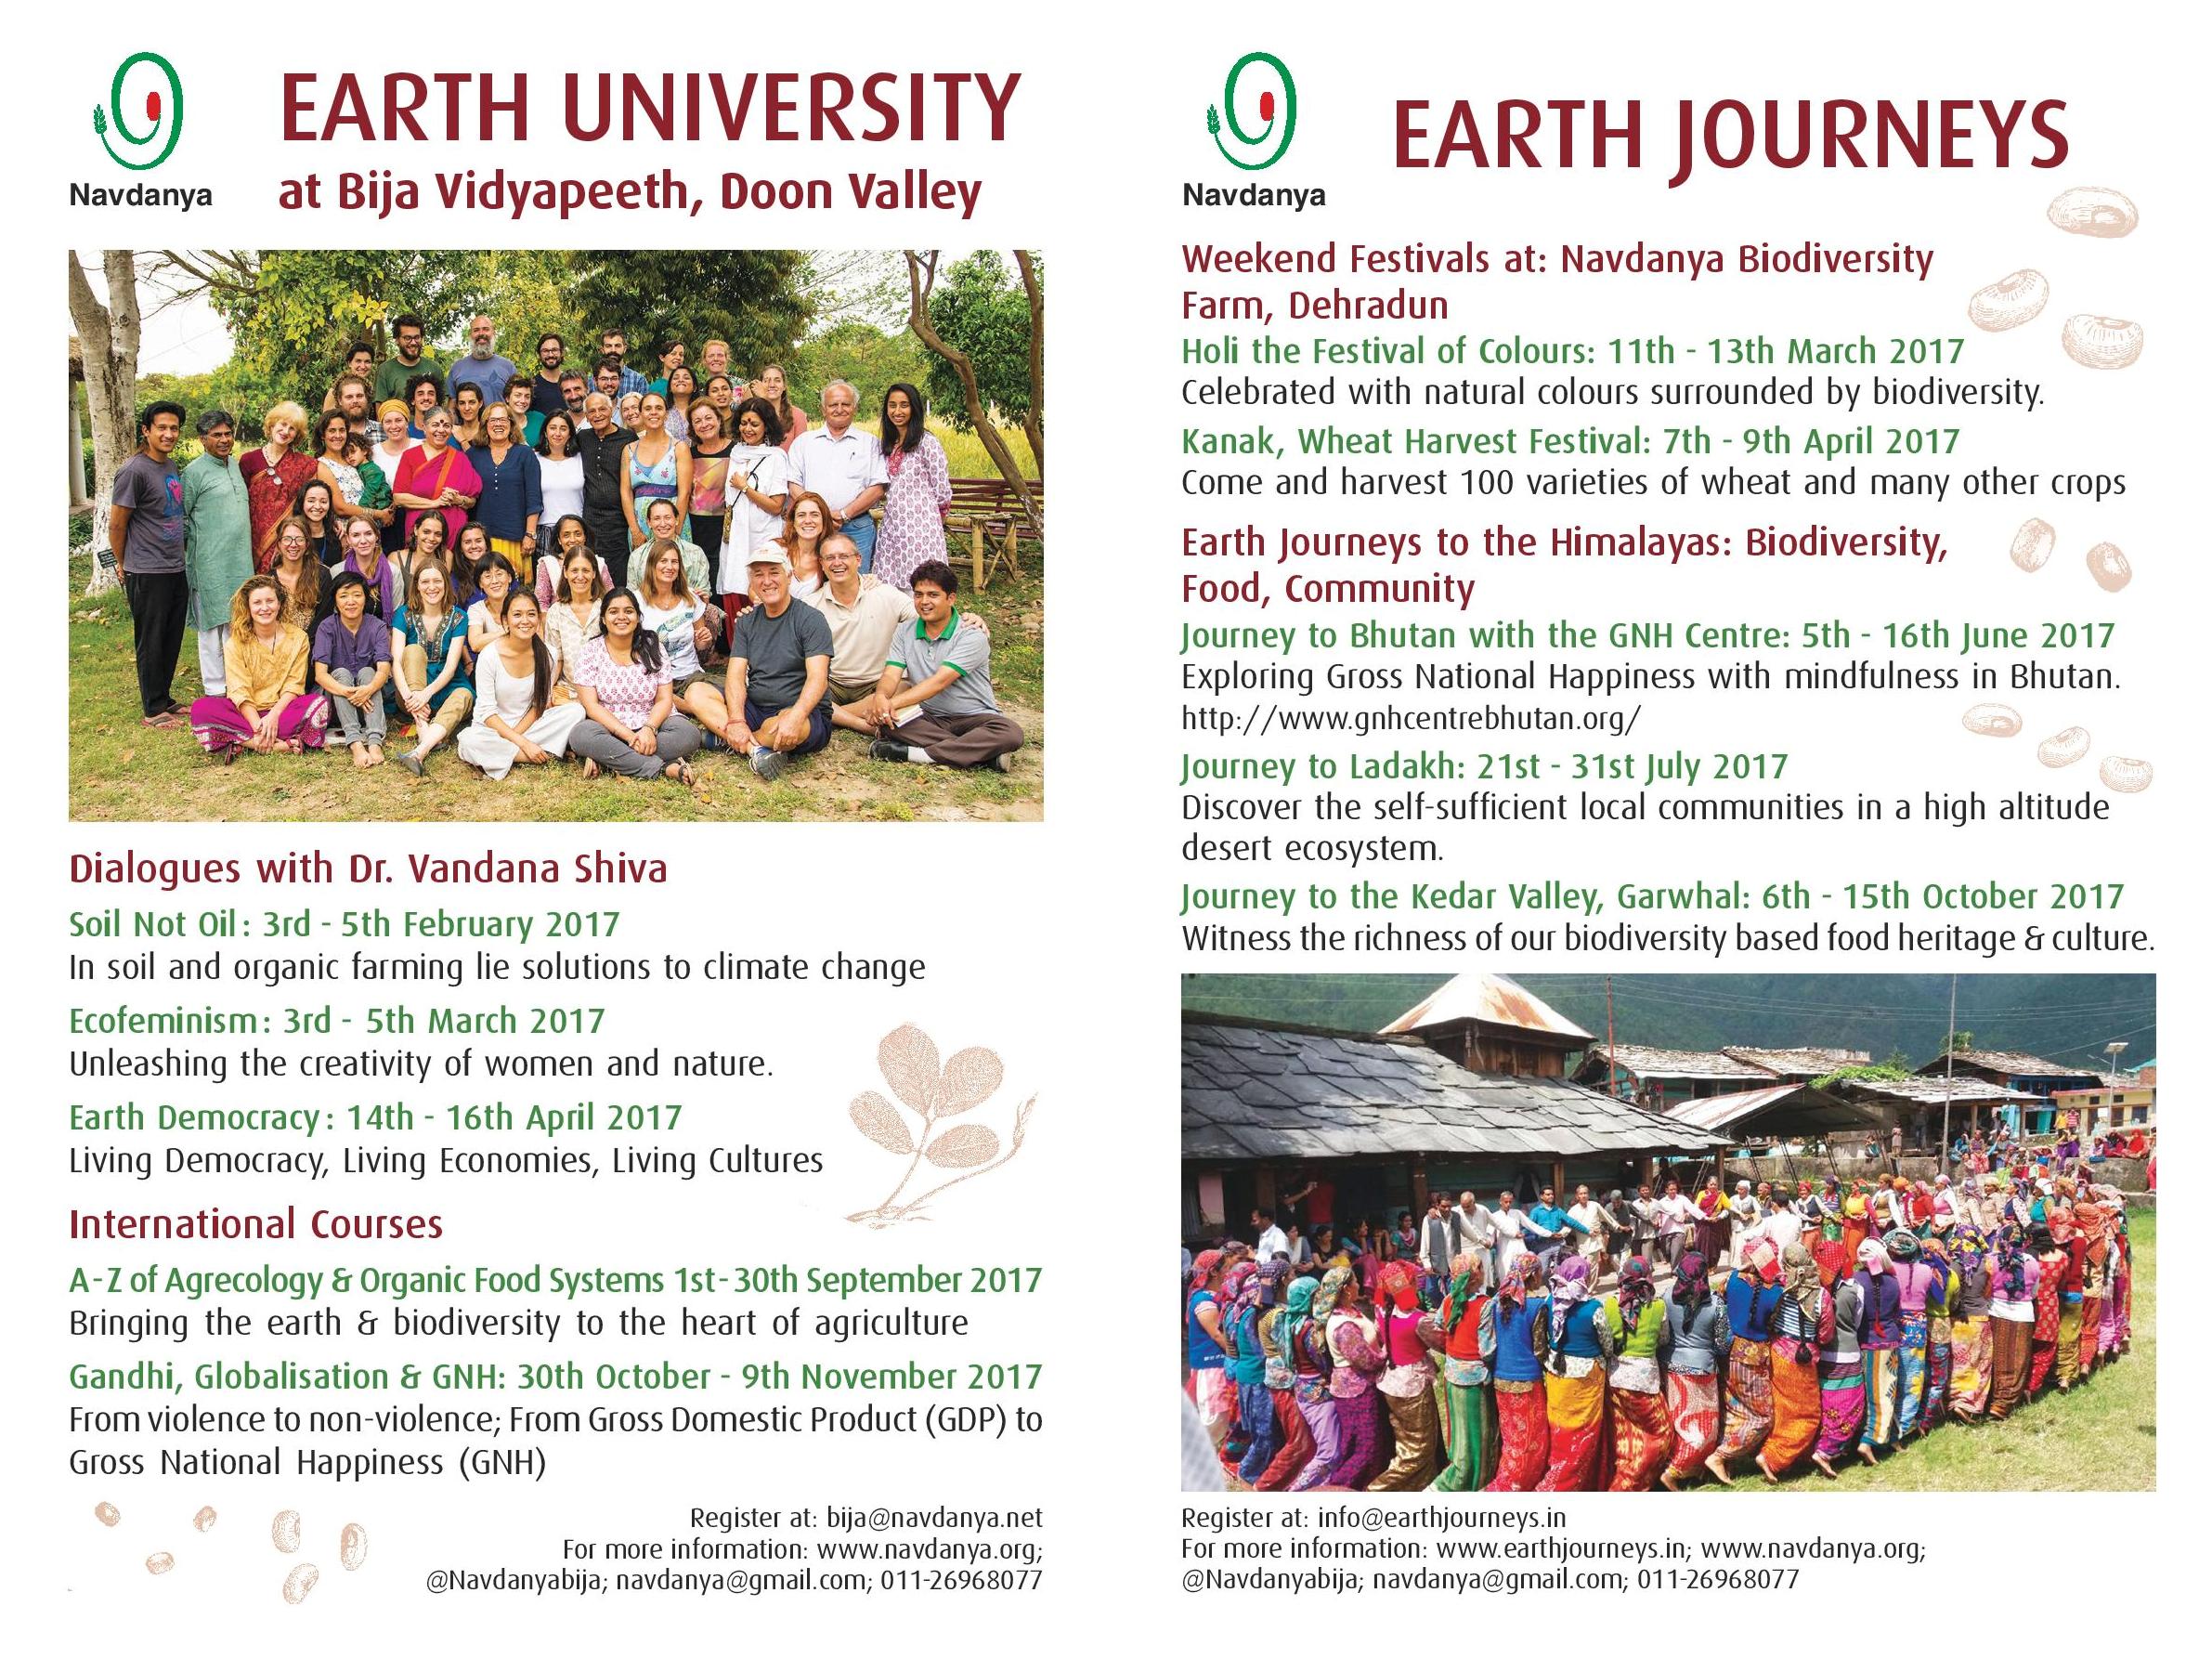 revised-earth-university-card_15-9-2016-page-001